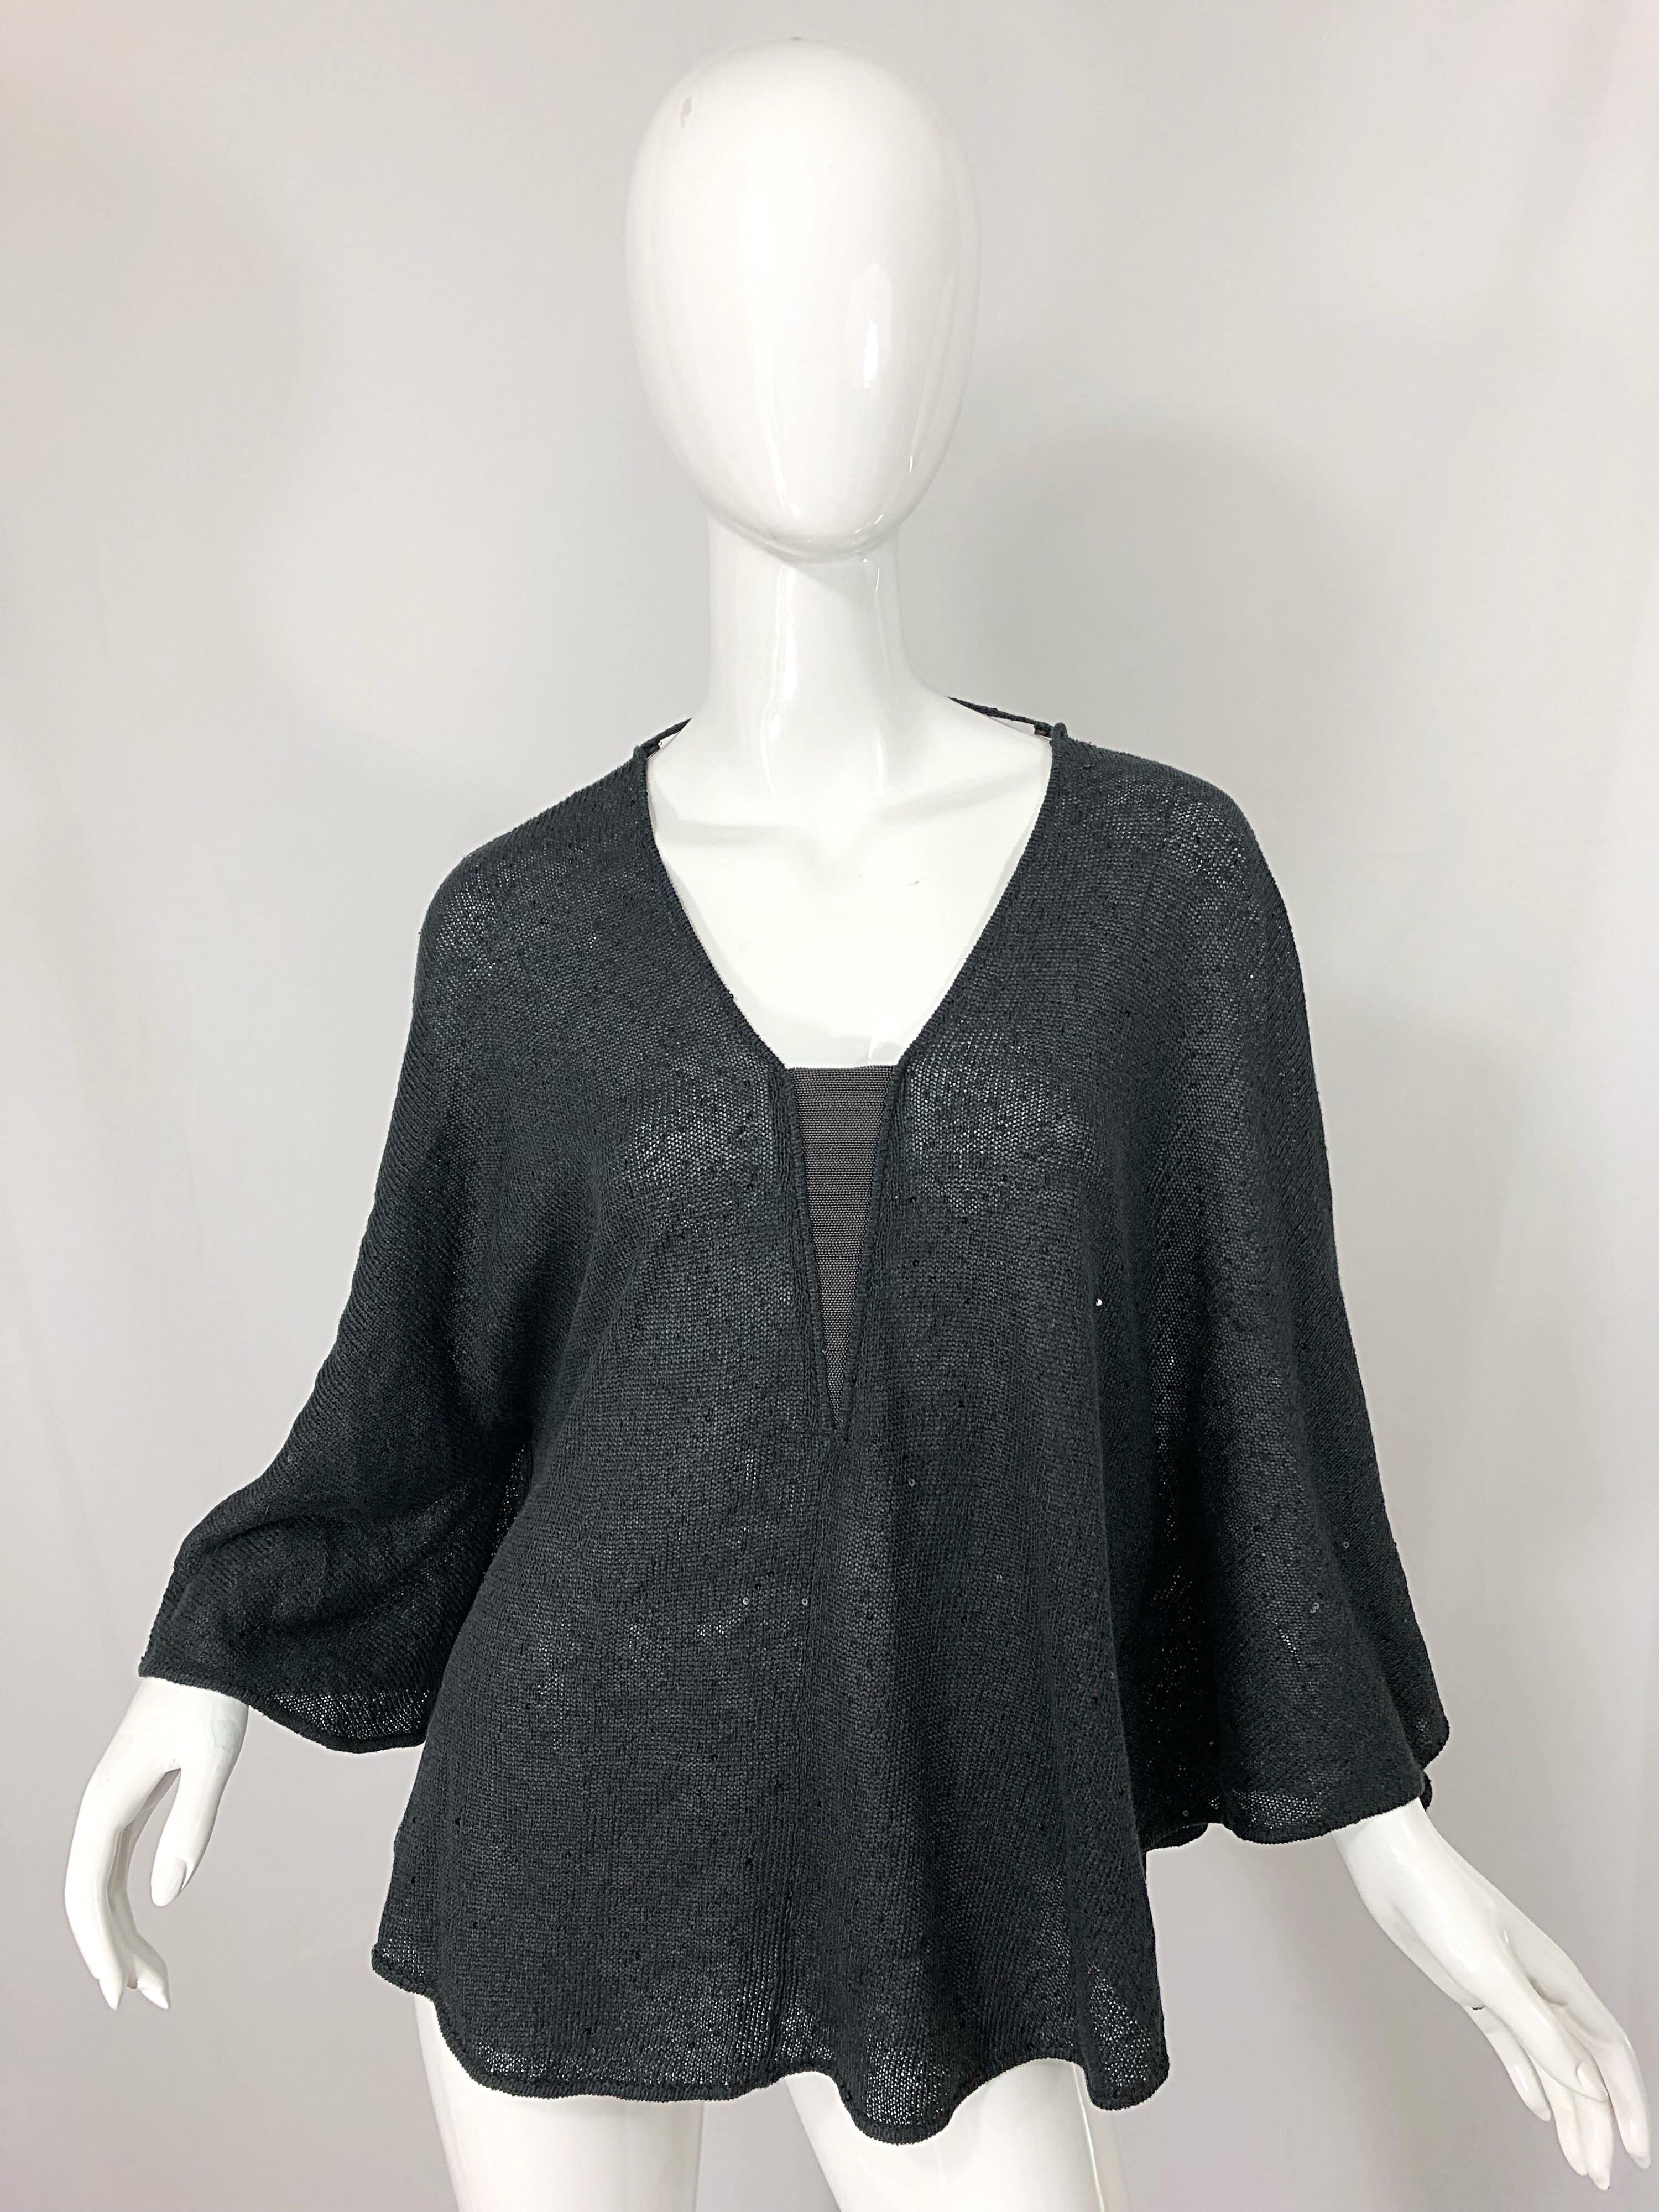 Chic brand new BRUNELLO CUCINELLI gray silk and linen blend sequined poncho top! Features hundreds of hand-sewn black mini sequins throughout. Gunmetal chain detail at center bust is lined, so you don’t feel the cold metal. String detail at back